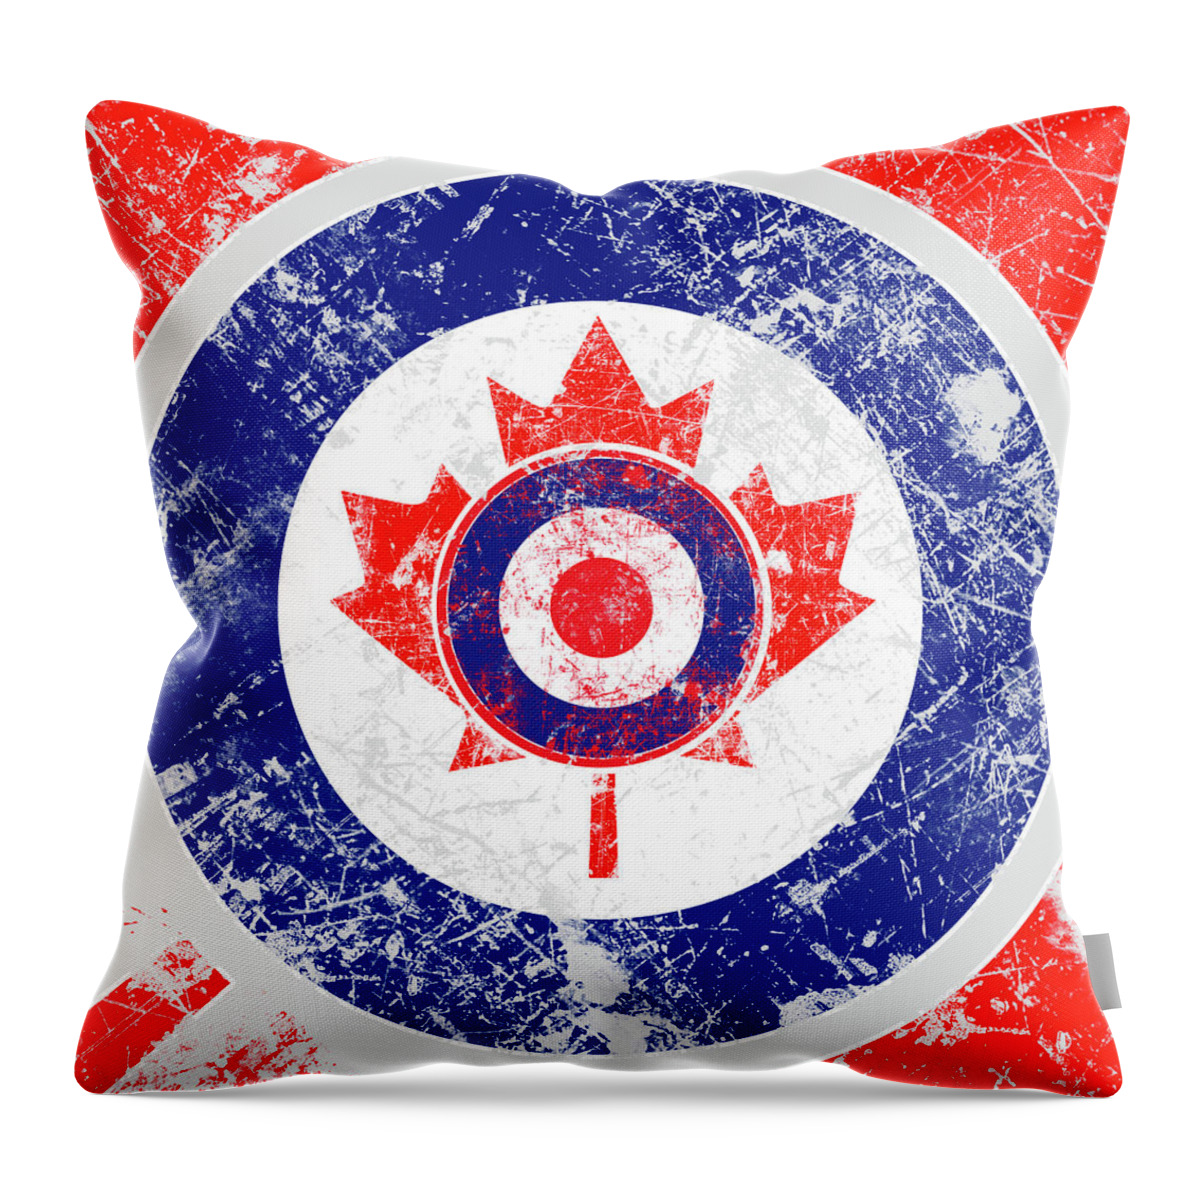 Mod Throw Pillow featuring the digital art Mod Roundel Canadian Maple Leaf in Grunge Distressed Style by Garaga Designs